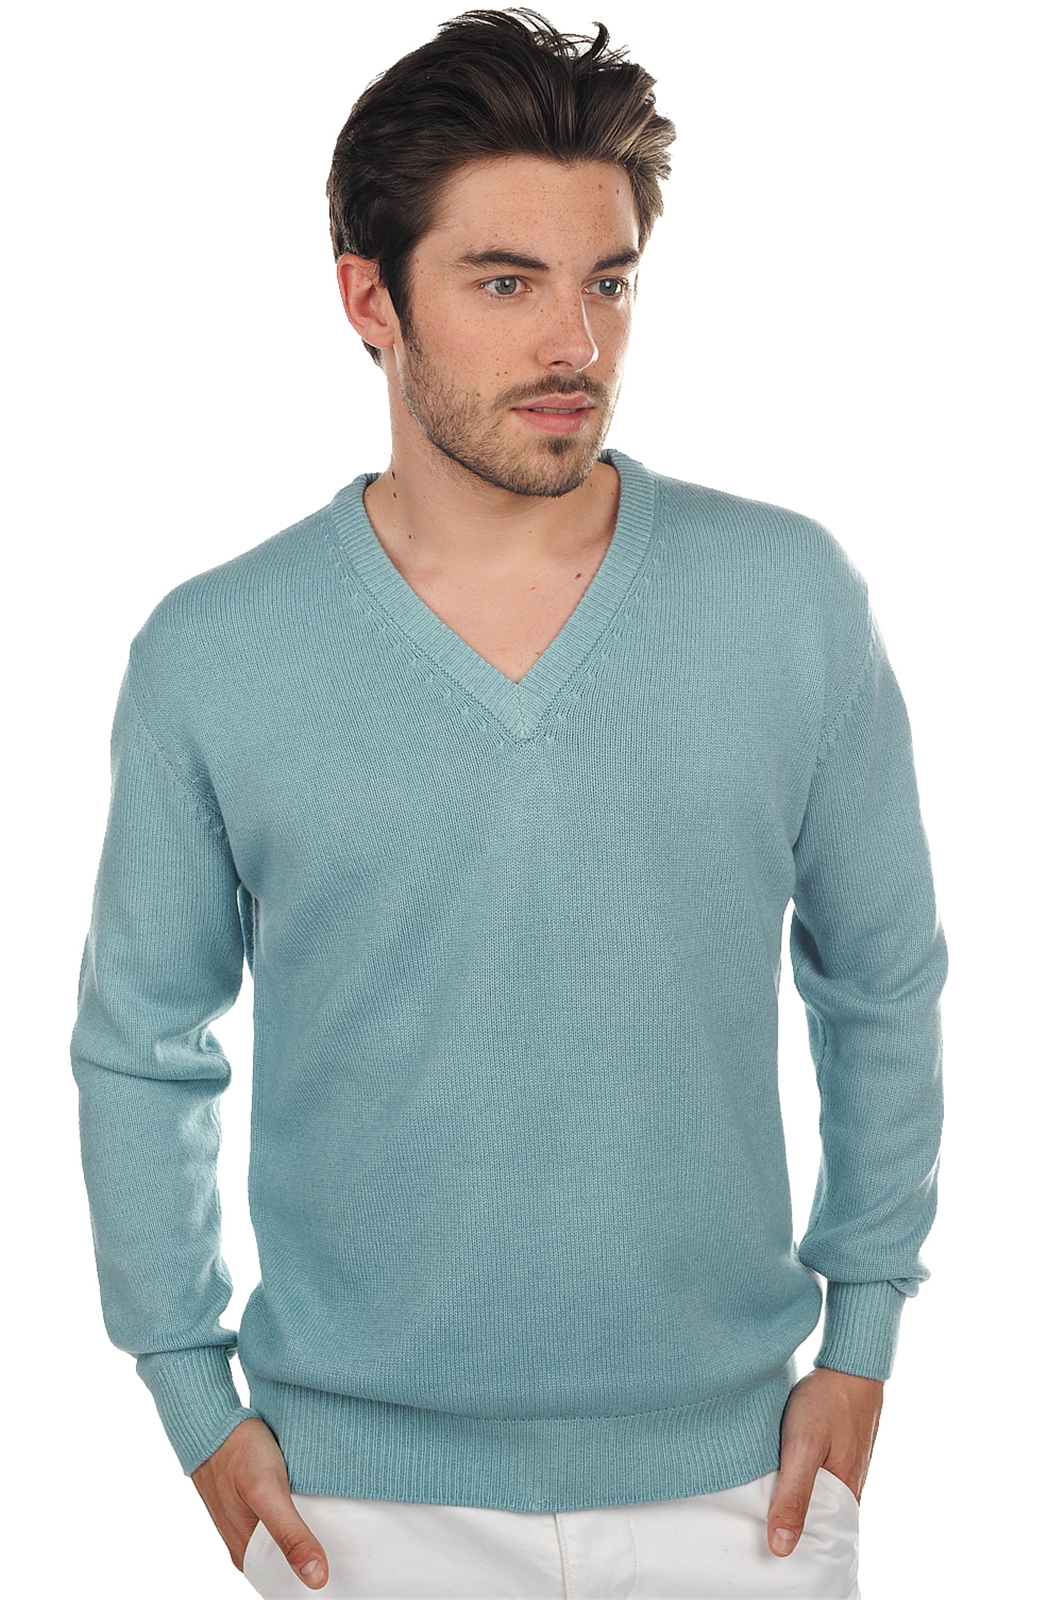 Cashmere men chunky sweater hippolyte 4f teal blue 2xl